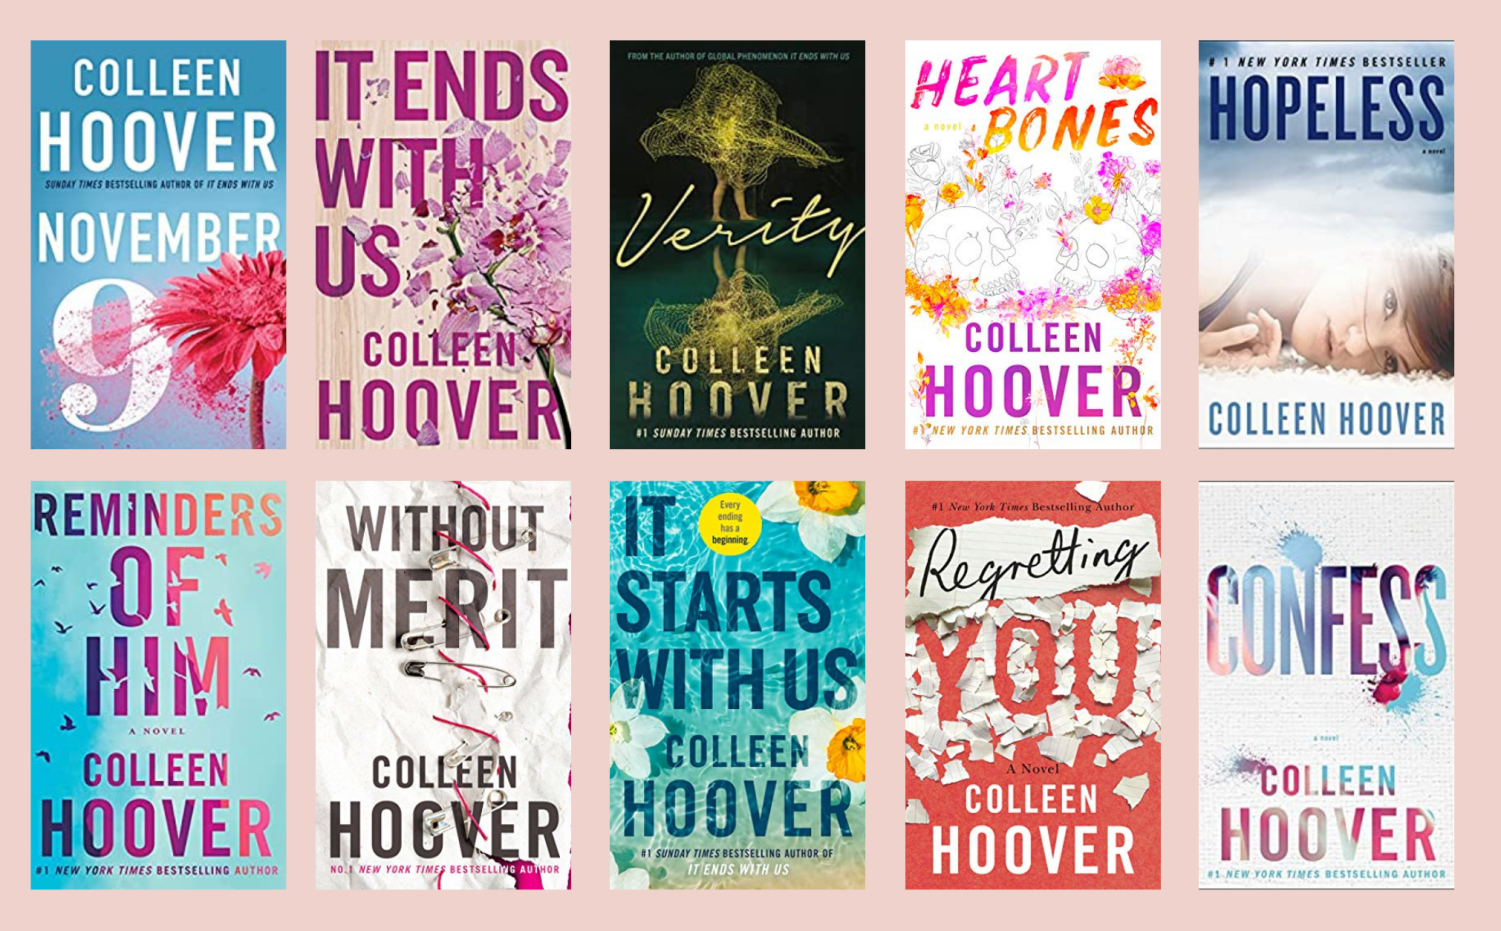 The Gator's Eye  Colleen Hoover- Does She Deserve The Hype?